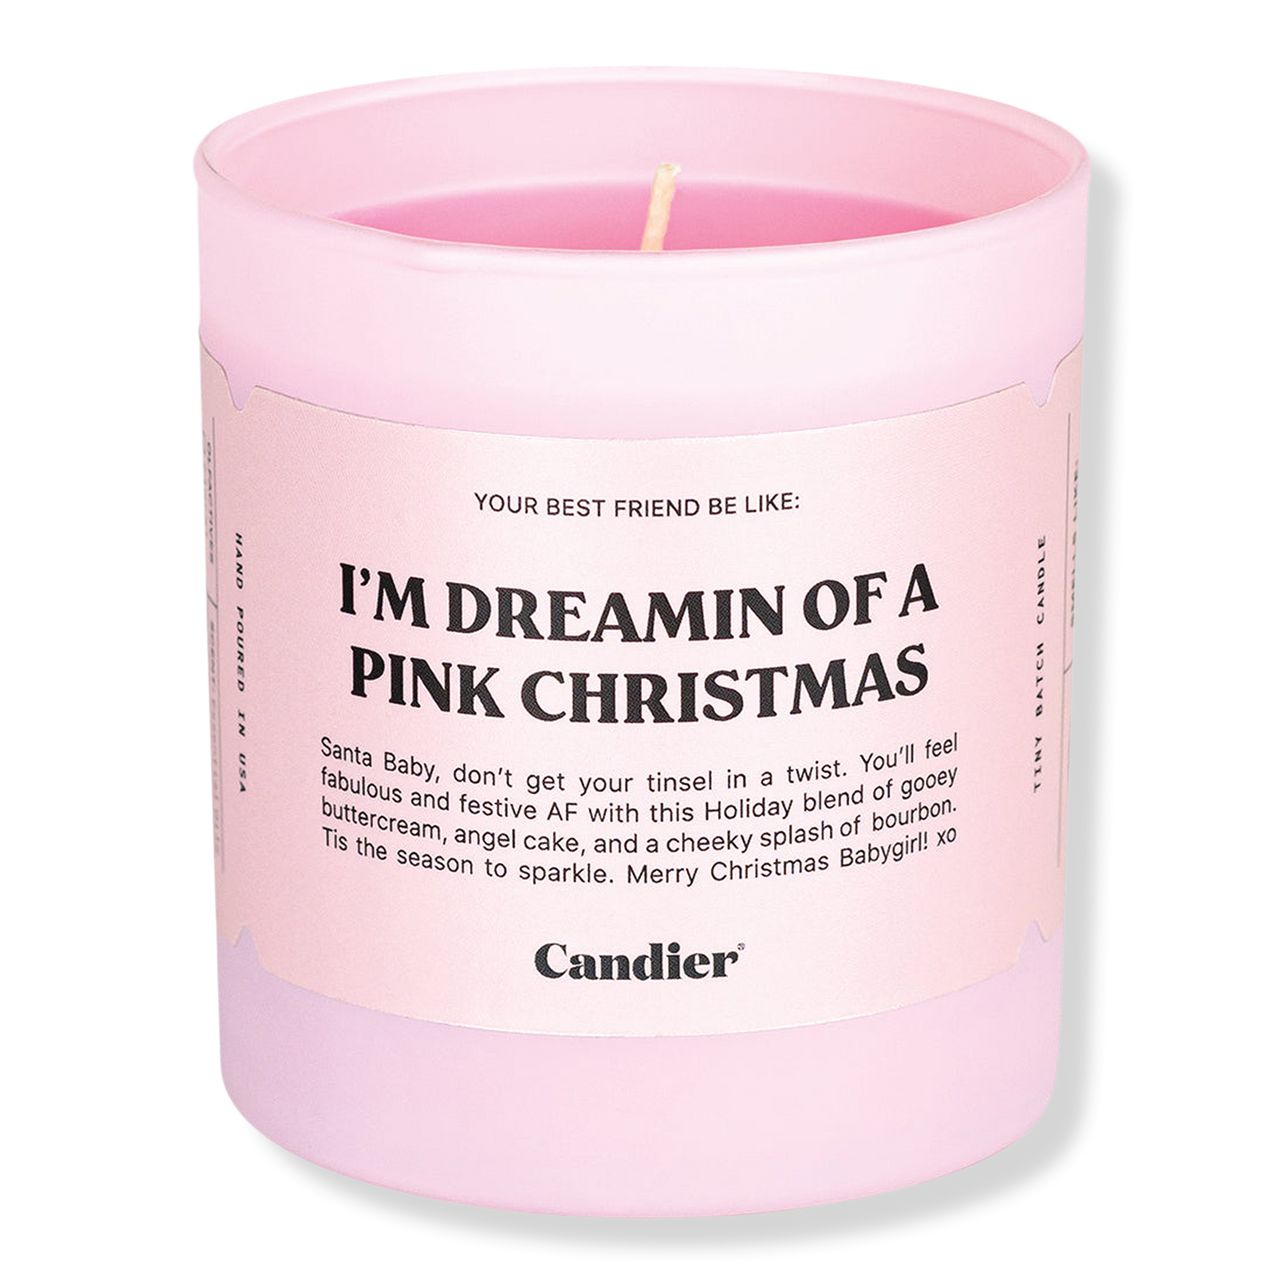 I'm Dreamin of a Pink Christmas Candle | Ulta